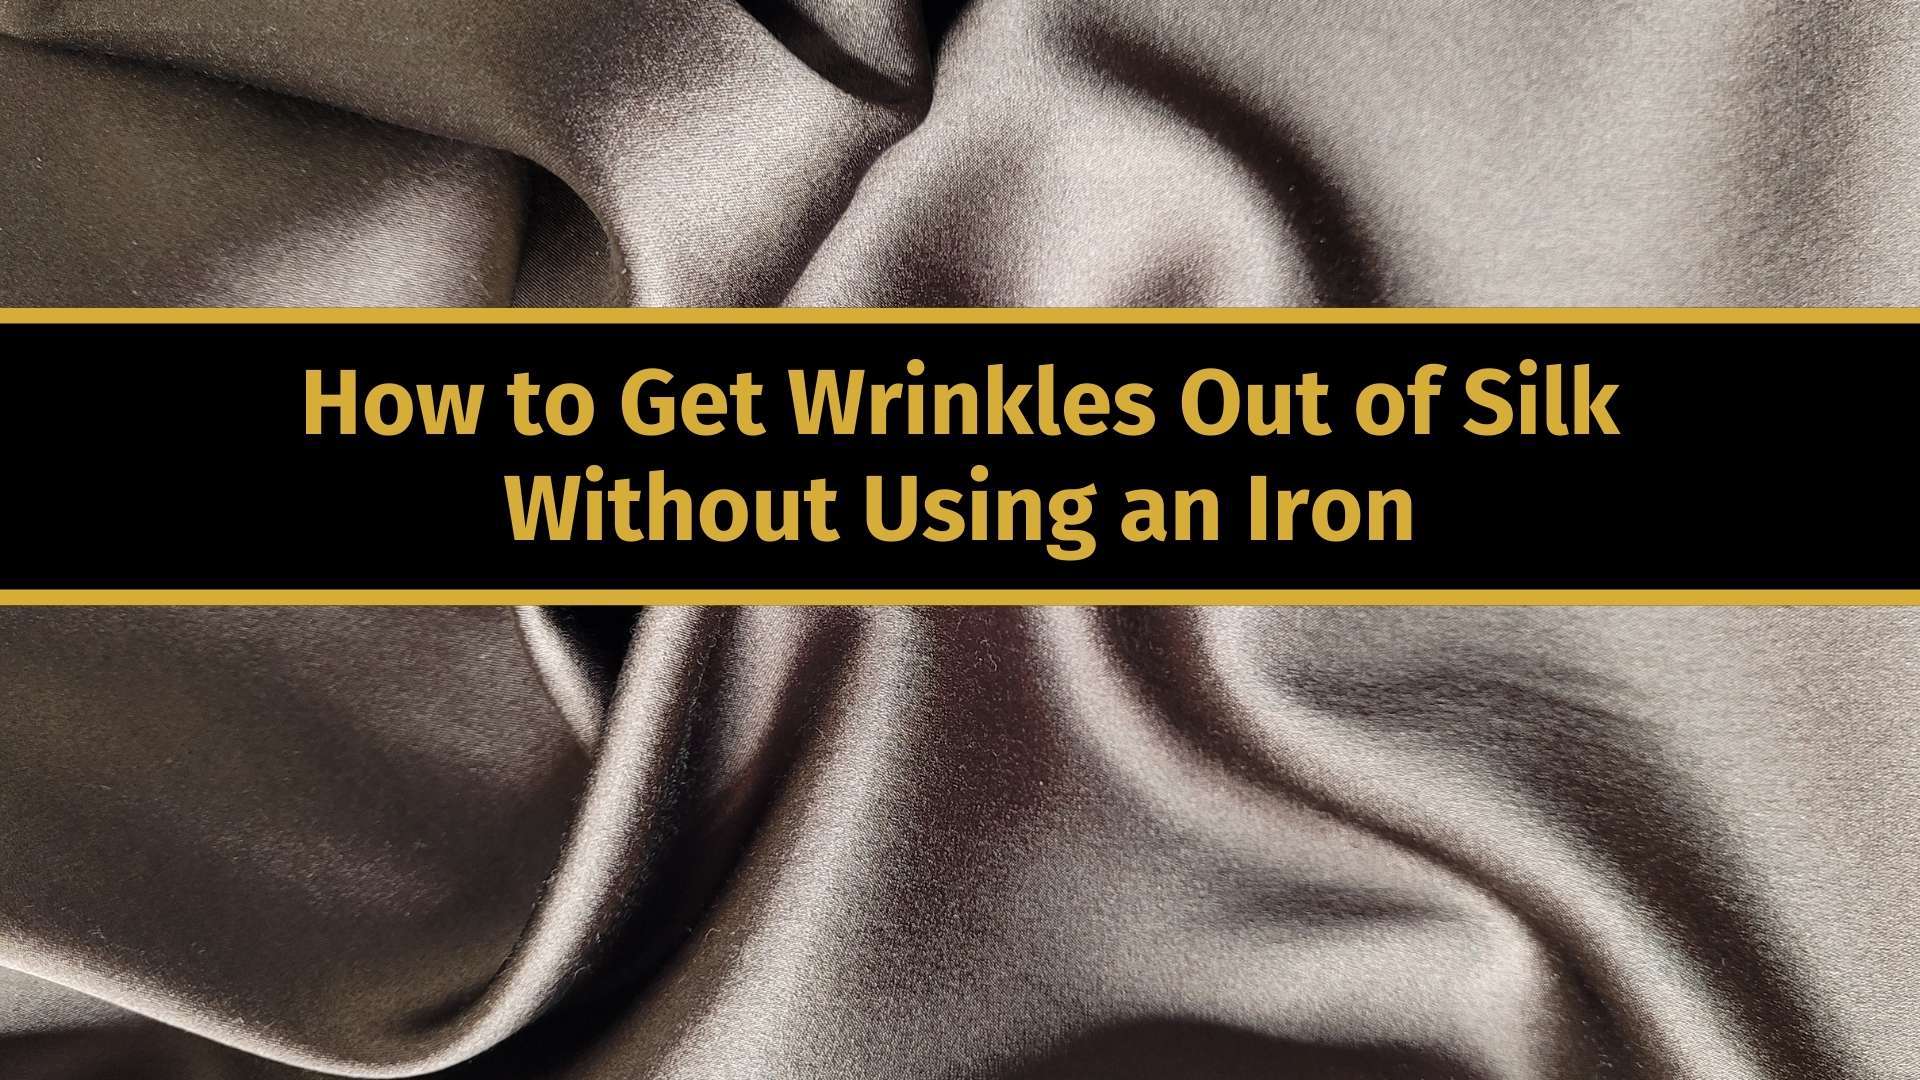 how to get wrinkles out of silk without an iron banner image